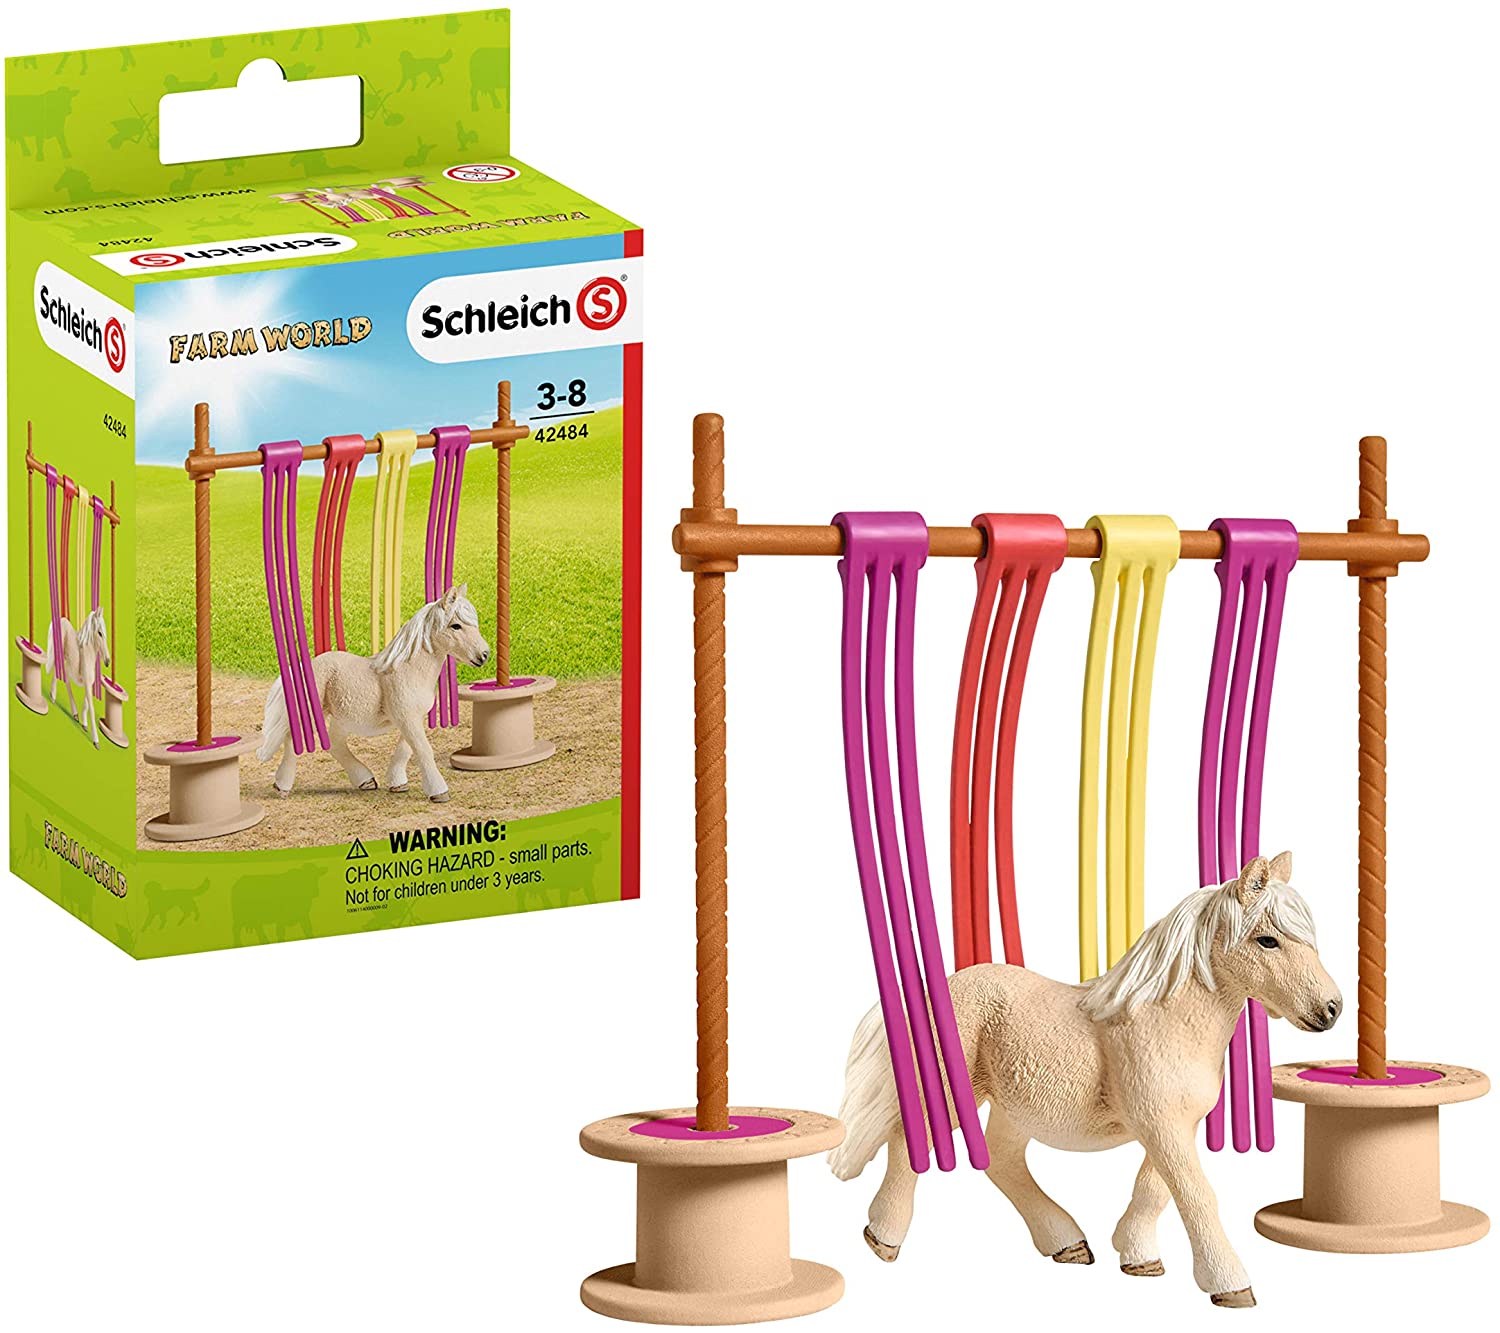 Schleich 42484 Farm World Playset Pony Flutter Curtain Toy from 3 Years